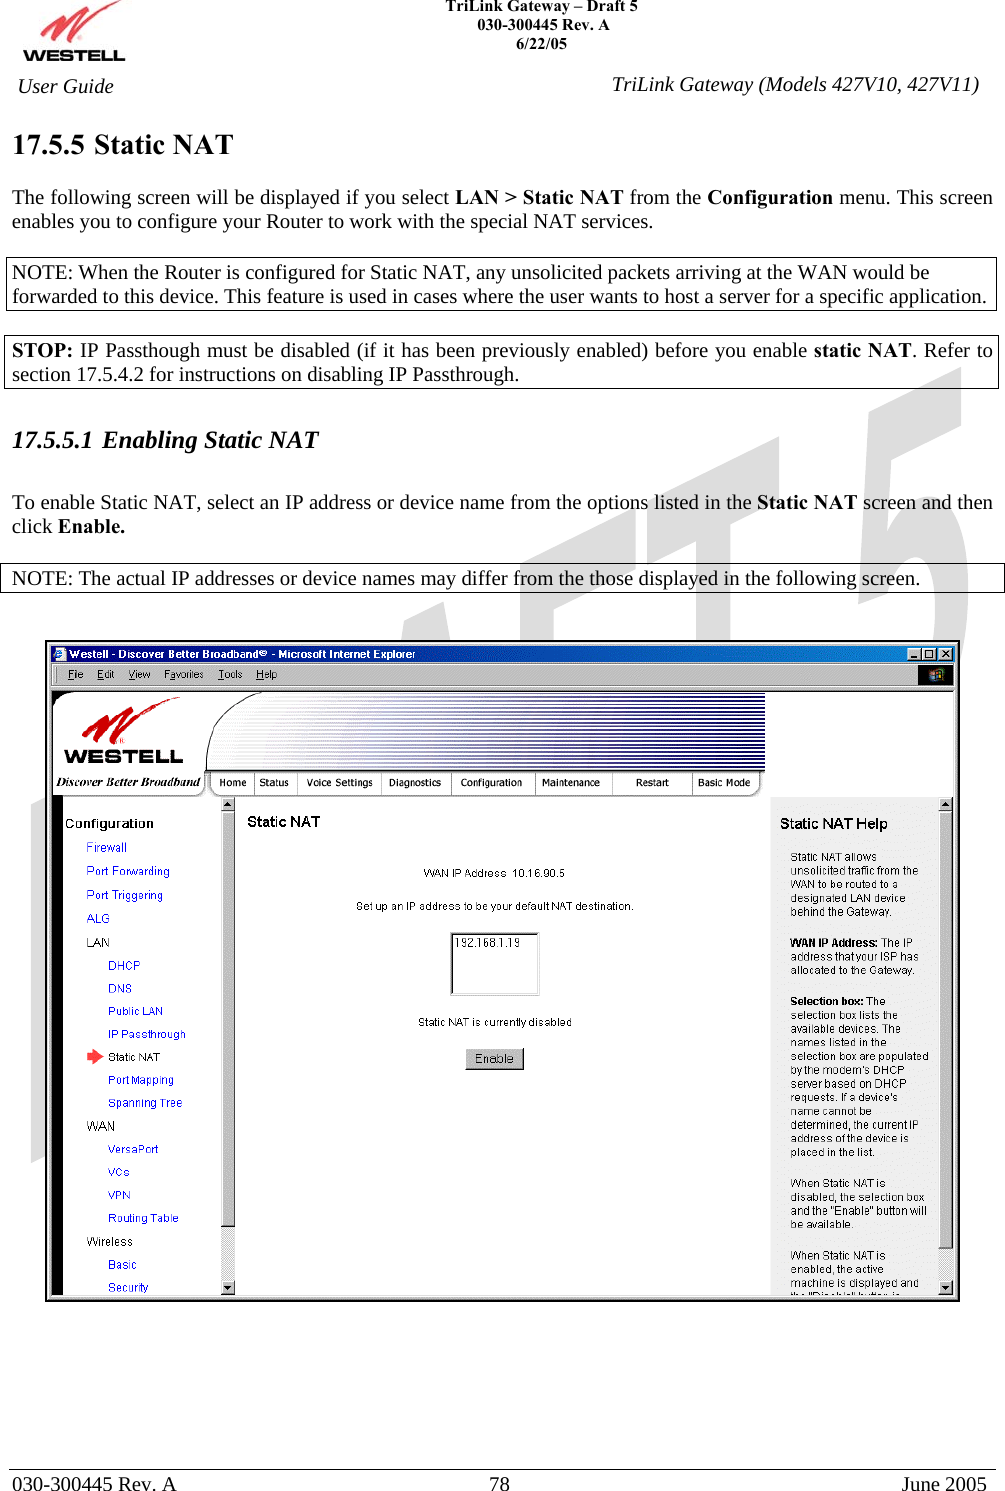    TriLink Gateway – Draft 5   030-300445 Rev. A 6/22/05   030-300445 Rev. A  78  June 2005  User Guide  TriLink Gateway (Models 427V10, 427V11)17.5.5  Static NAT  The following screen will be displayed if you select LAN &gt; Static NAT from the Configuration menu. This screen enables you to configure your Router to work with the special NAT services.  NOTE: When the Router is configured for Static NAT, any unsolicited packets arriving at the WAN would be forwarded to this device. This feature is used in cases where the user wants to host a server for a specific application.   STOP: IP Passthough must be disabled (if it has been previously enabled) before you enable static NAT. Refer to section 17.5.4.2 for instructions on disabling IP Passthrough.  17.5.5.1 Enabling Static NAT  To enable Static NAT, select an IP address or device name from the options listed in the Static NAT screen and then click Enable.   NOTE: The actual IP addresses or device names may differ from the those displayed in the following screen.          